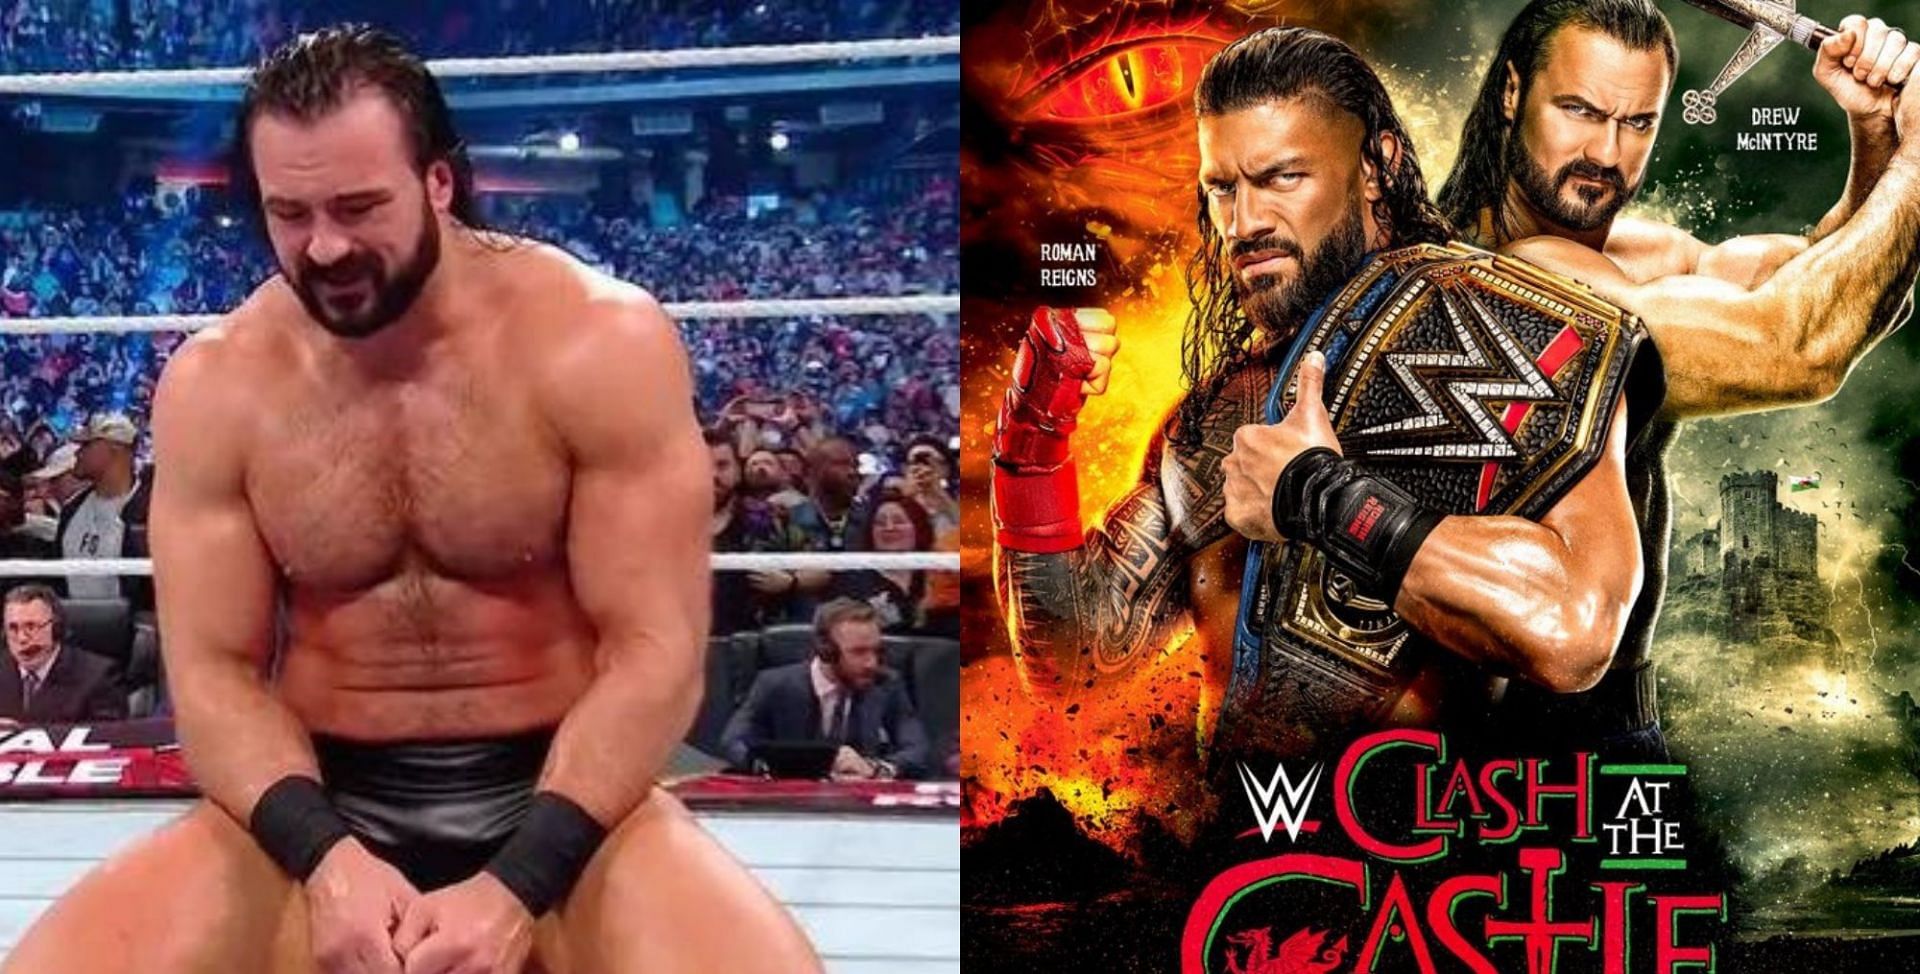 Drew McIntyre was announced to face Roman Reigns at Clash at the Castle